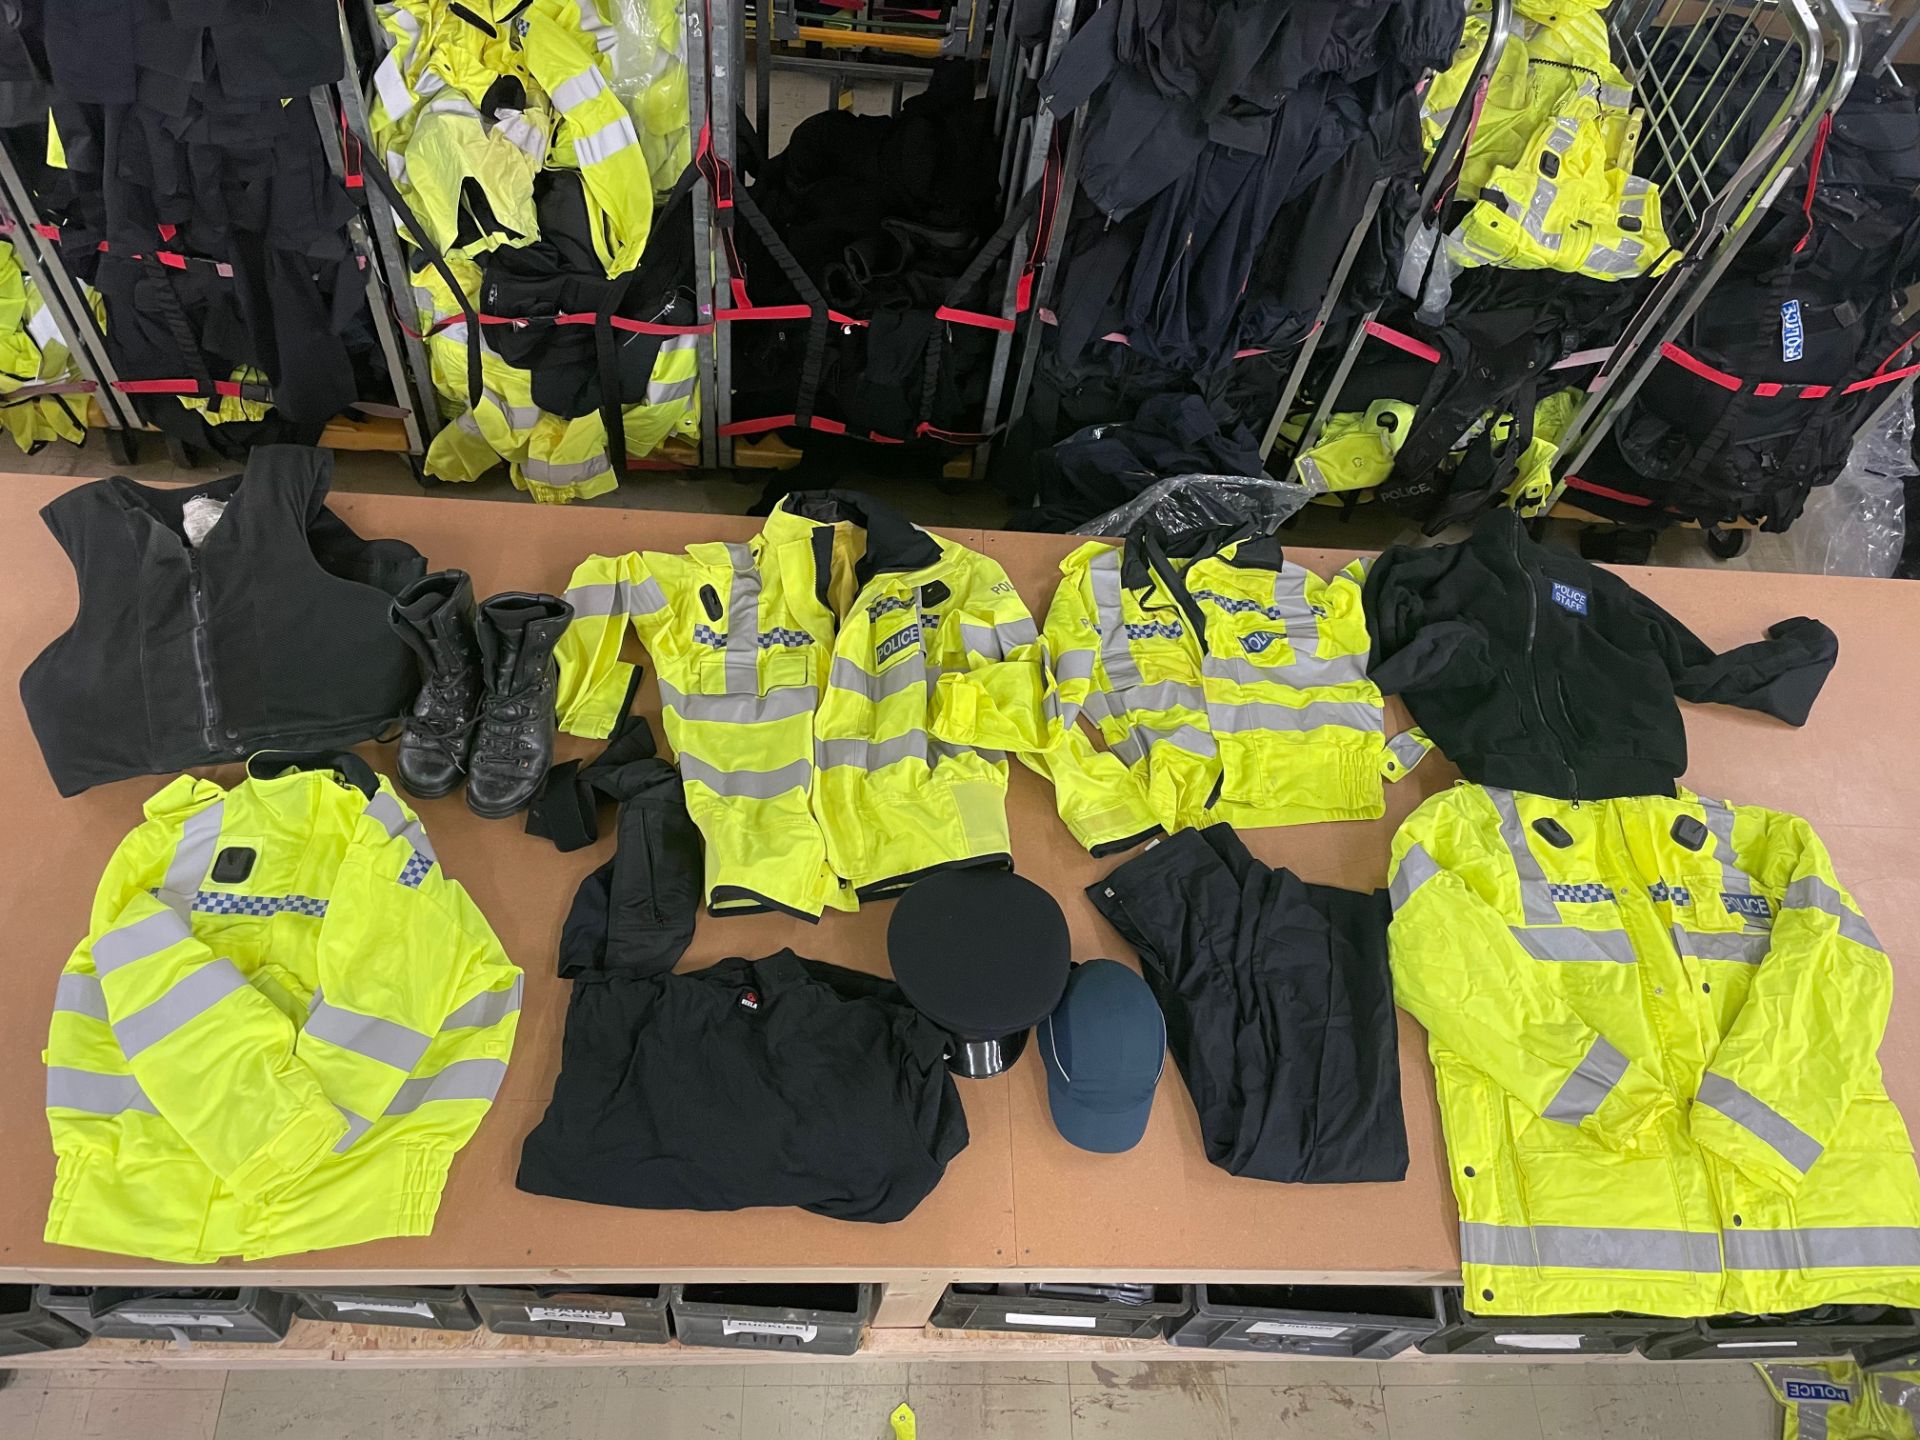 20 X BAGS FULL TO THE BRIM WITH POLICE CLOTHING & ACCESSORIES - RRP £5500.00 - NO VAT ON HAMMER - Image 7 of 12